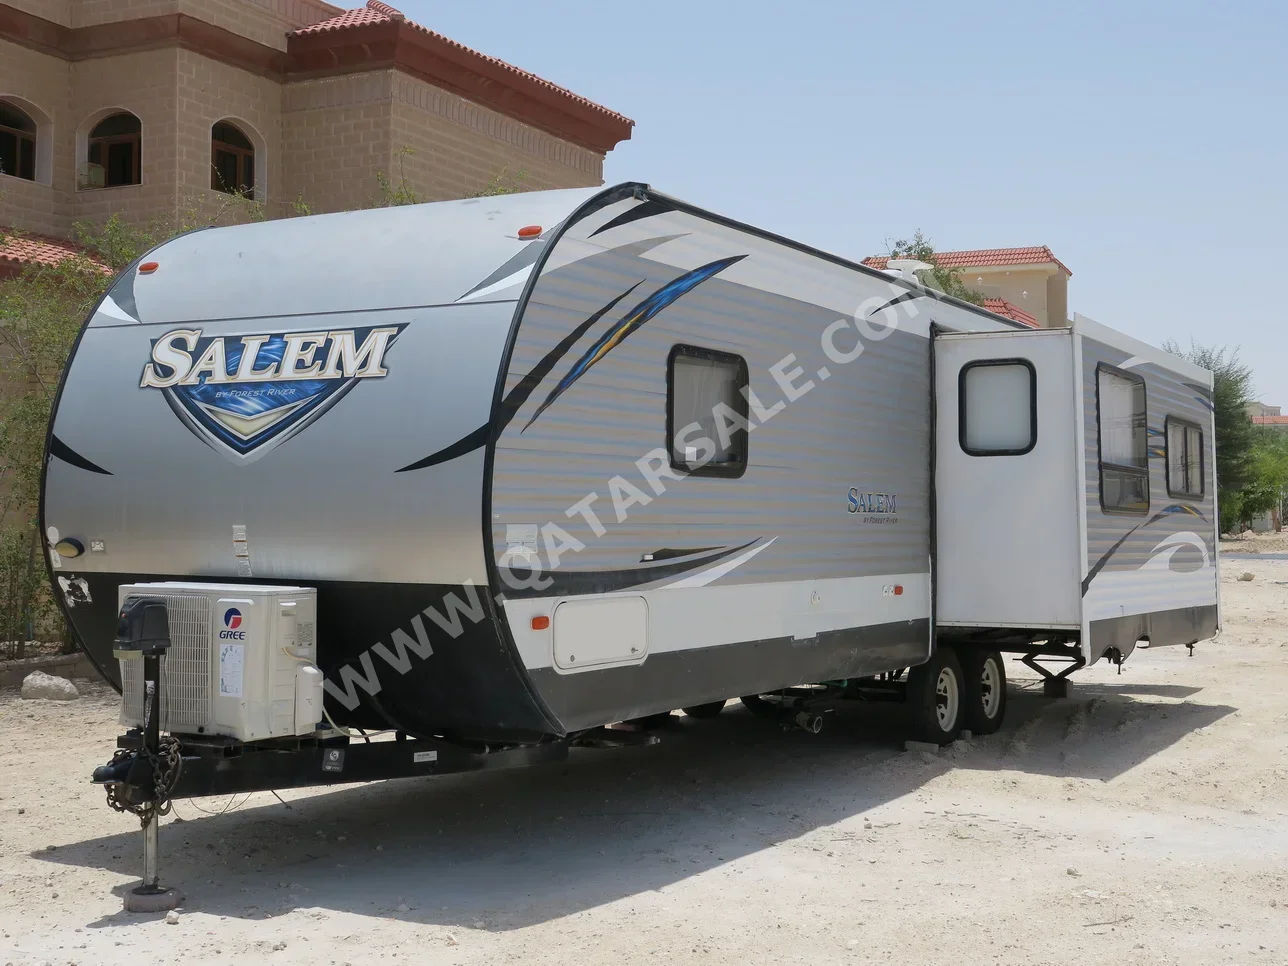 Caravan 2018  White Made in United States of America(USA)